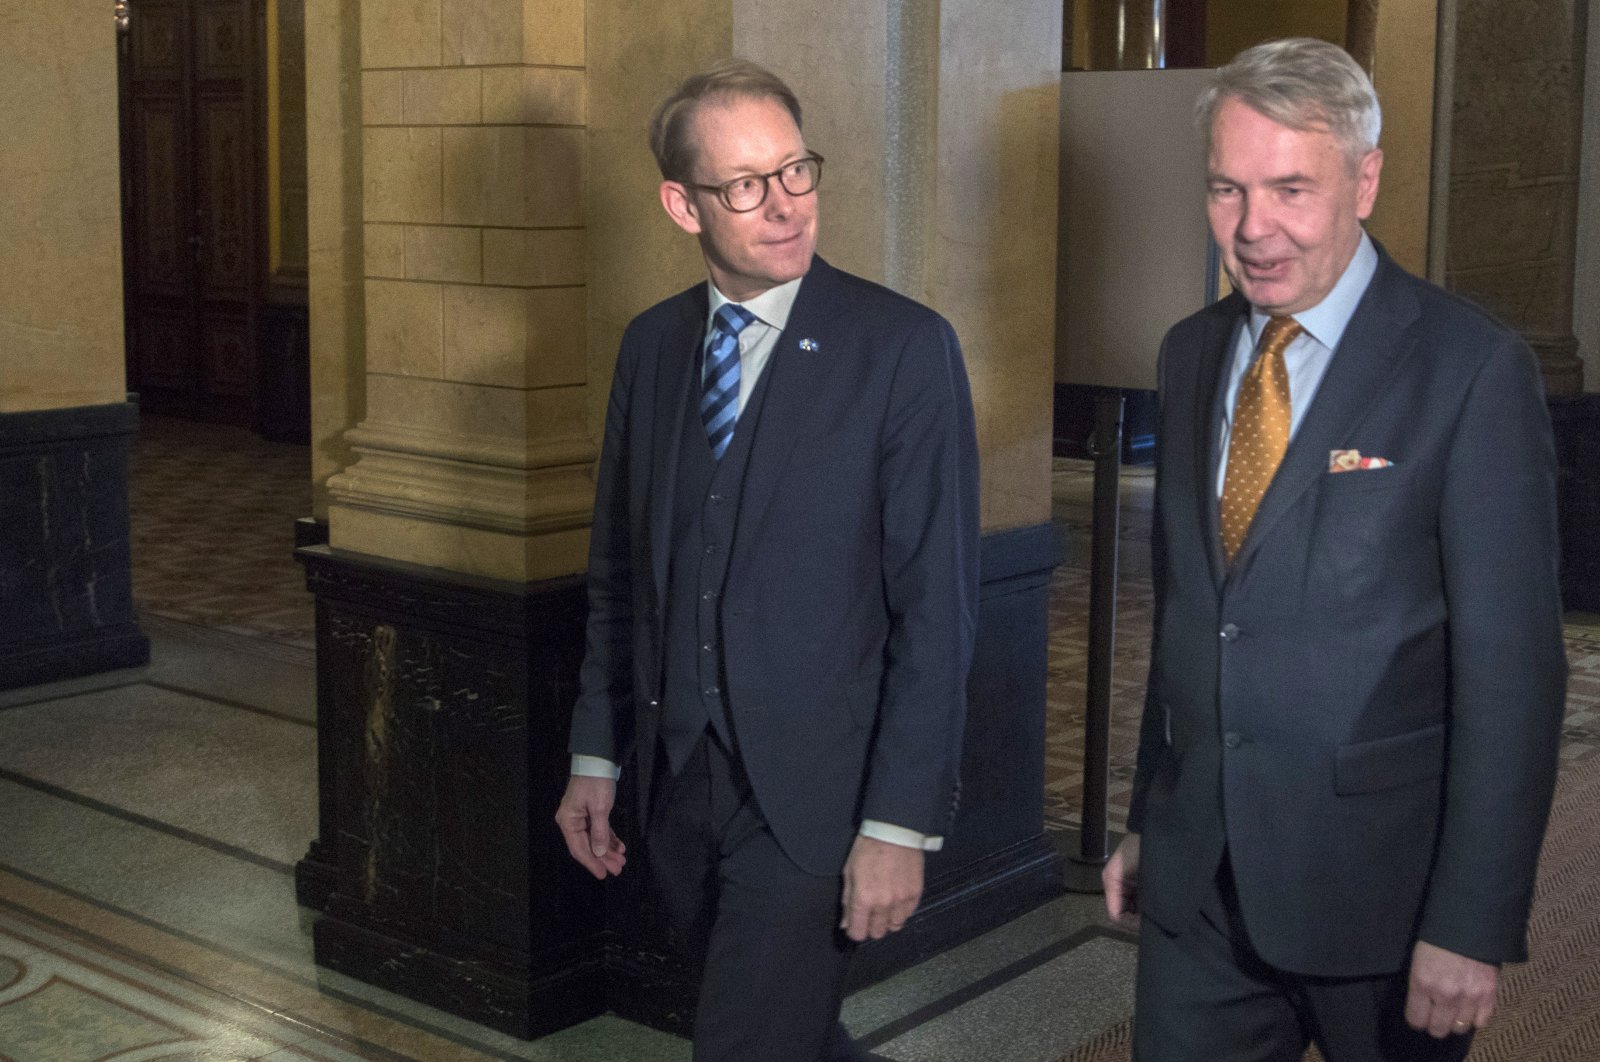 Sweden&#039;s Foreign Minister Tobias Billstroem (L) and Finland&#039;s Foreign Minister Pekka Haavisto (R) chat during their meeting at the Government House in Helsinki, Finland, Oct. 21, 2022.  EPA/MAURI RATILAINEN